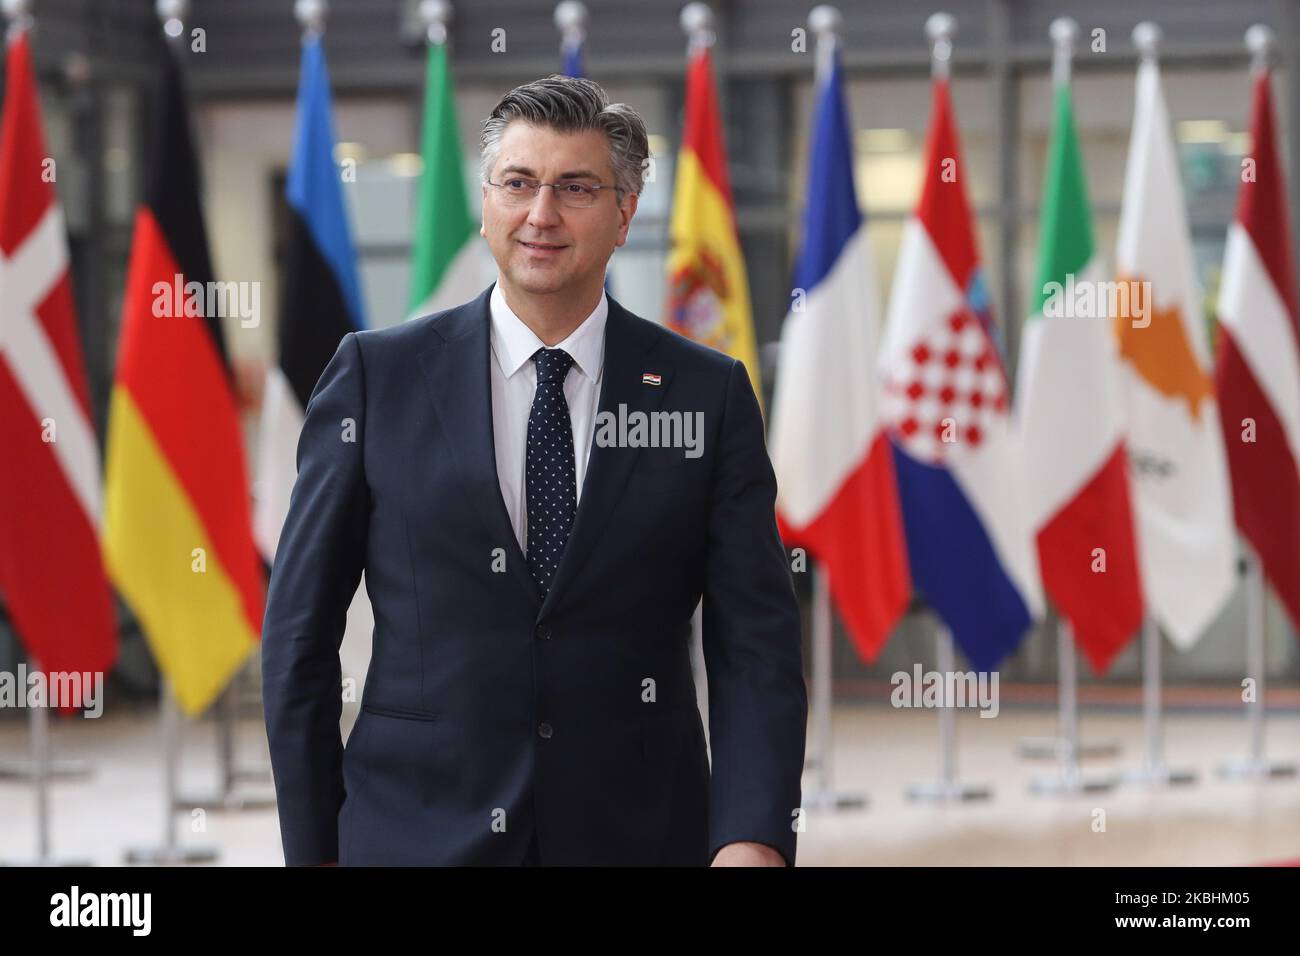 Prime Minister of Croatia Andrej Plenkovic as seen arriving on the red carpet with EU flags at forum Europa building. The Croatian PM is having a doorstep press and media briefing during the second day of the special European Council, EURO leaders summit - meeting about for the negotiations of the future planning of the next long term budget, financial framework of the European Union for 2021-2027. Brussels, Belgium, February 21, 2020 (Photo by Nicolas Economou/NurPhoto) Stock Photo